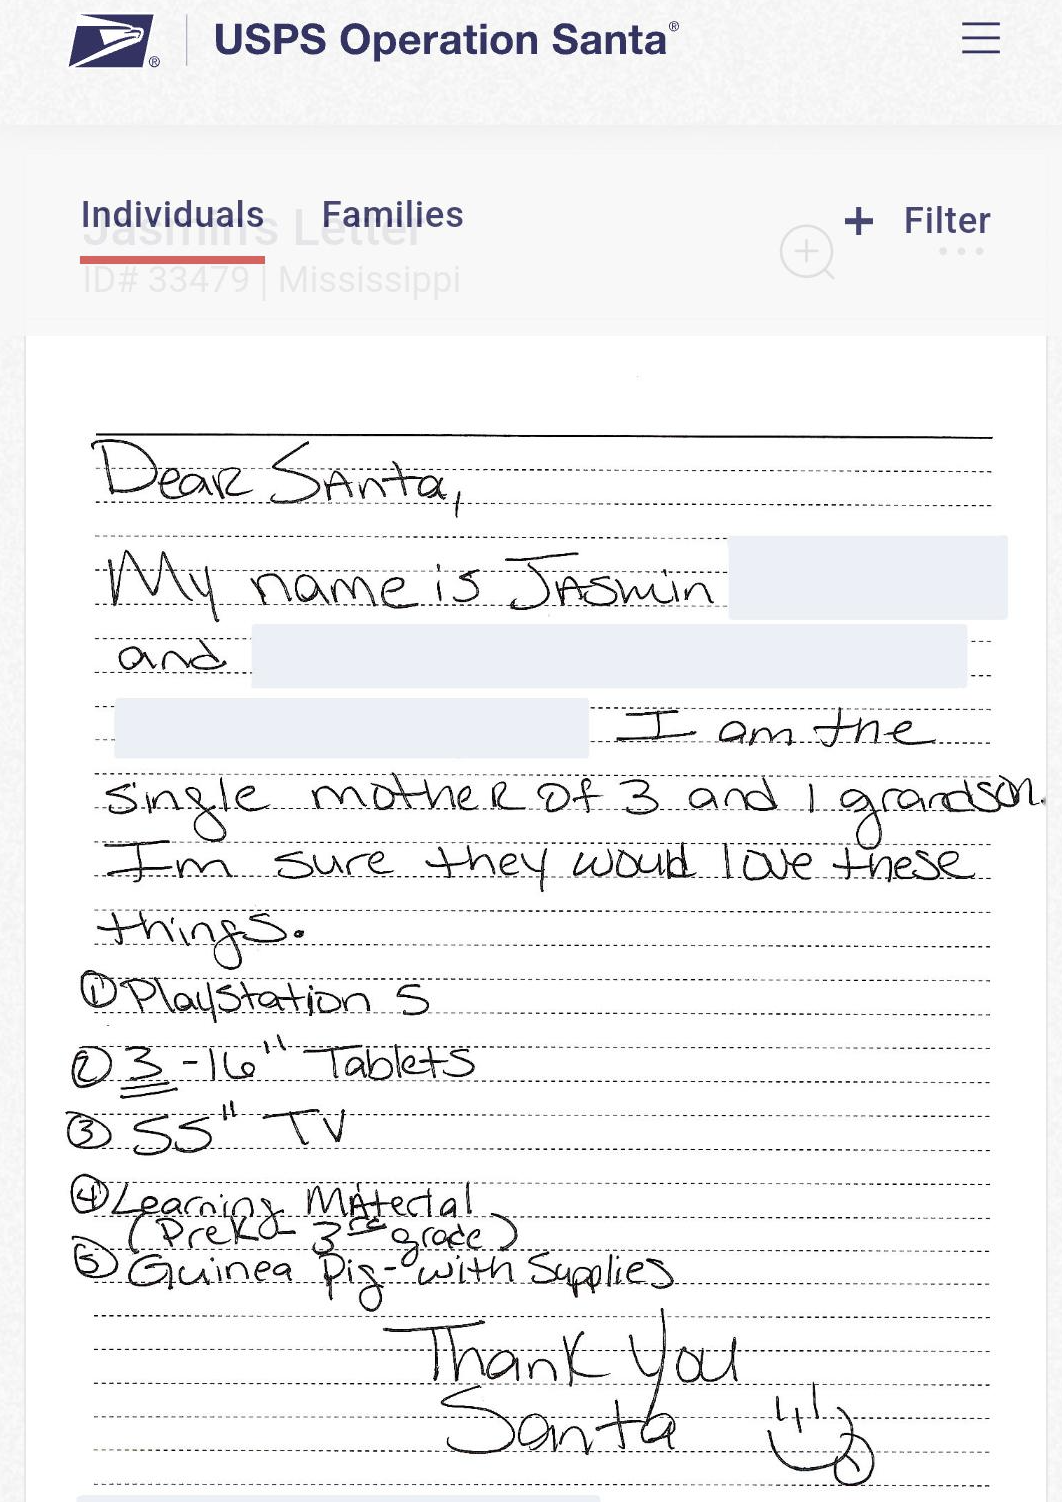 document - Usps Operation Santa Individuals Families Filter Dear Santa My name is Jasmin and I am the Single mother of 3 and I grandson. Im sure they would love these things. Playstation S 0316" Tablets 55" Tv Learning Material Bigrade. Guinea Pig with Su